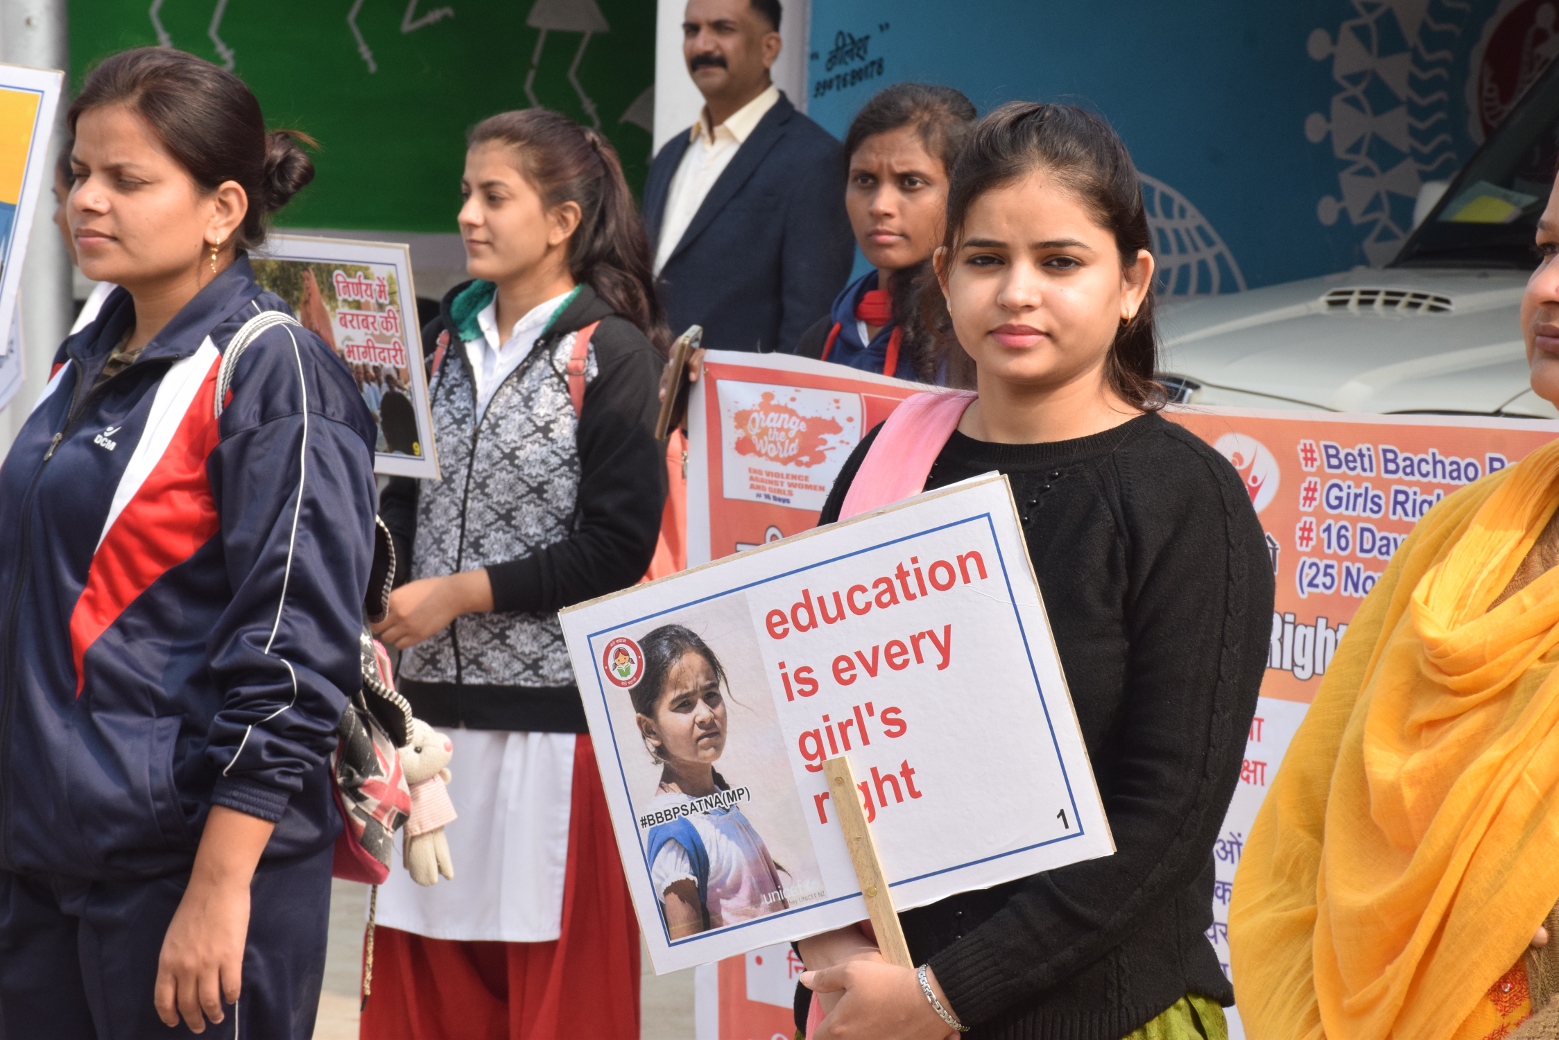 Daughters asked for right to education, security and equality